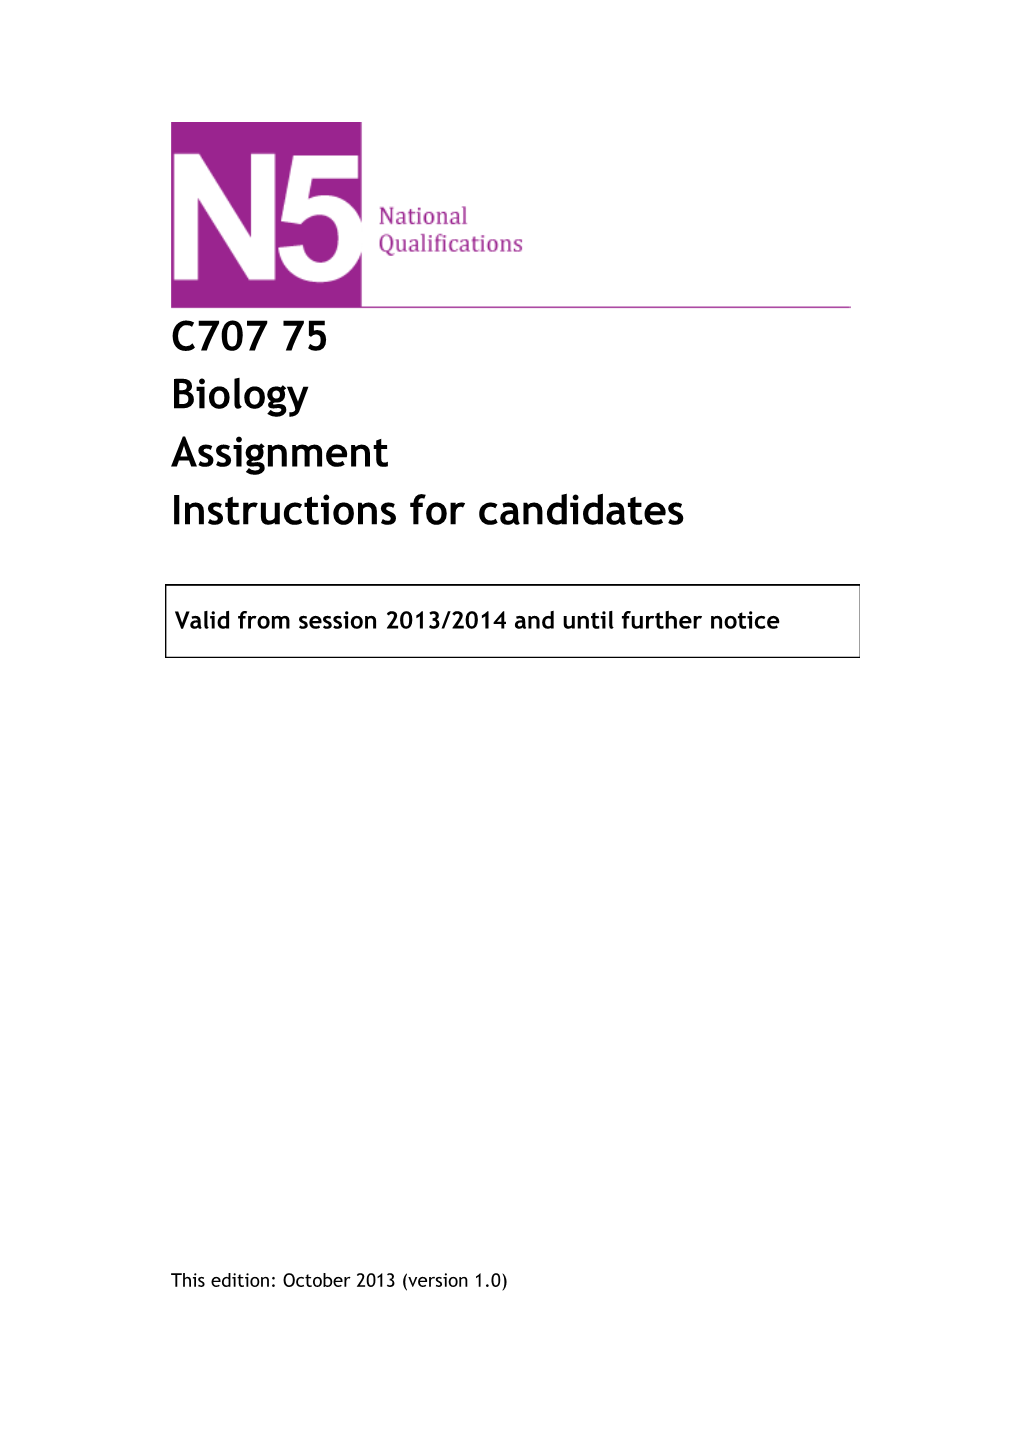 Instructions for Candidates